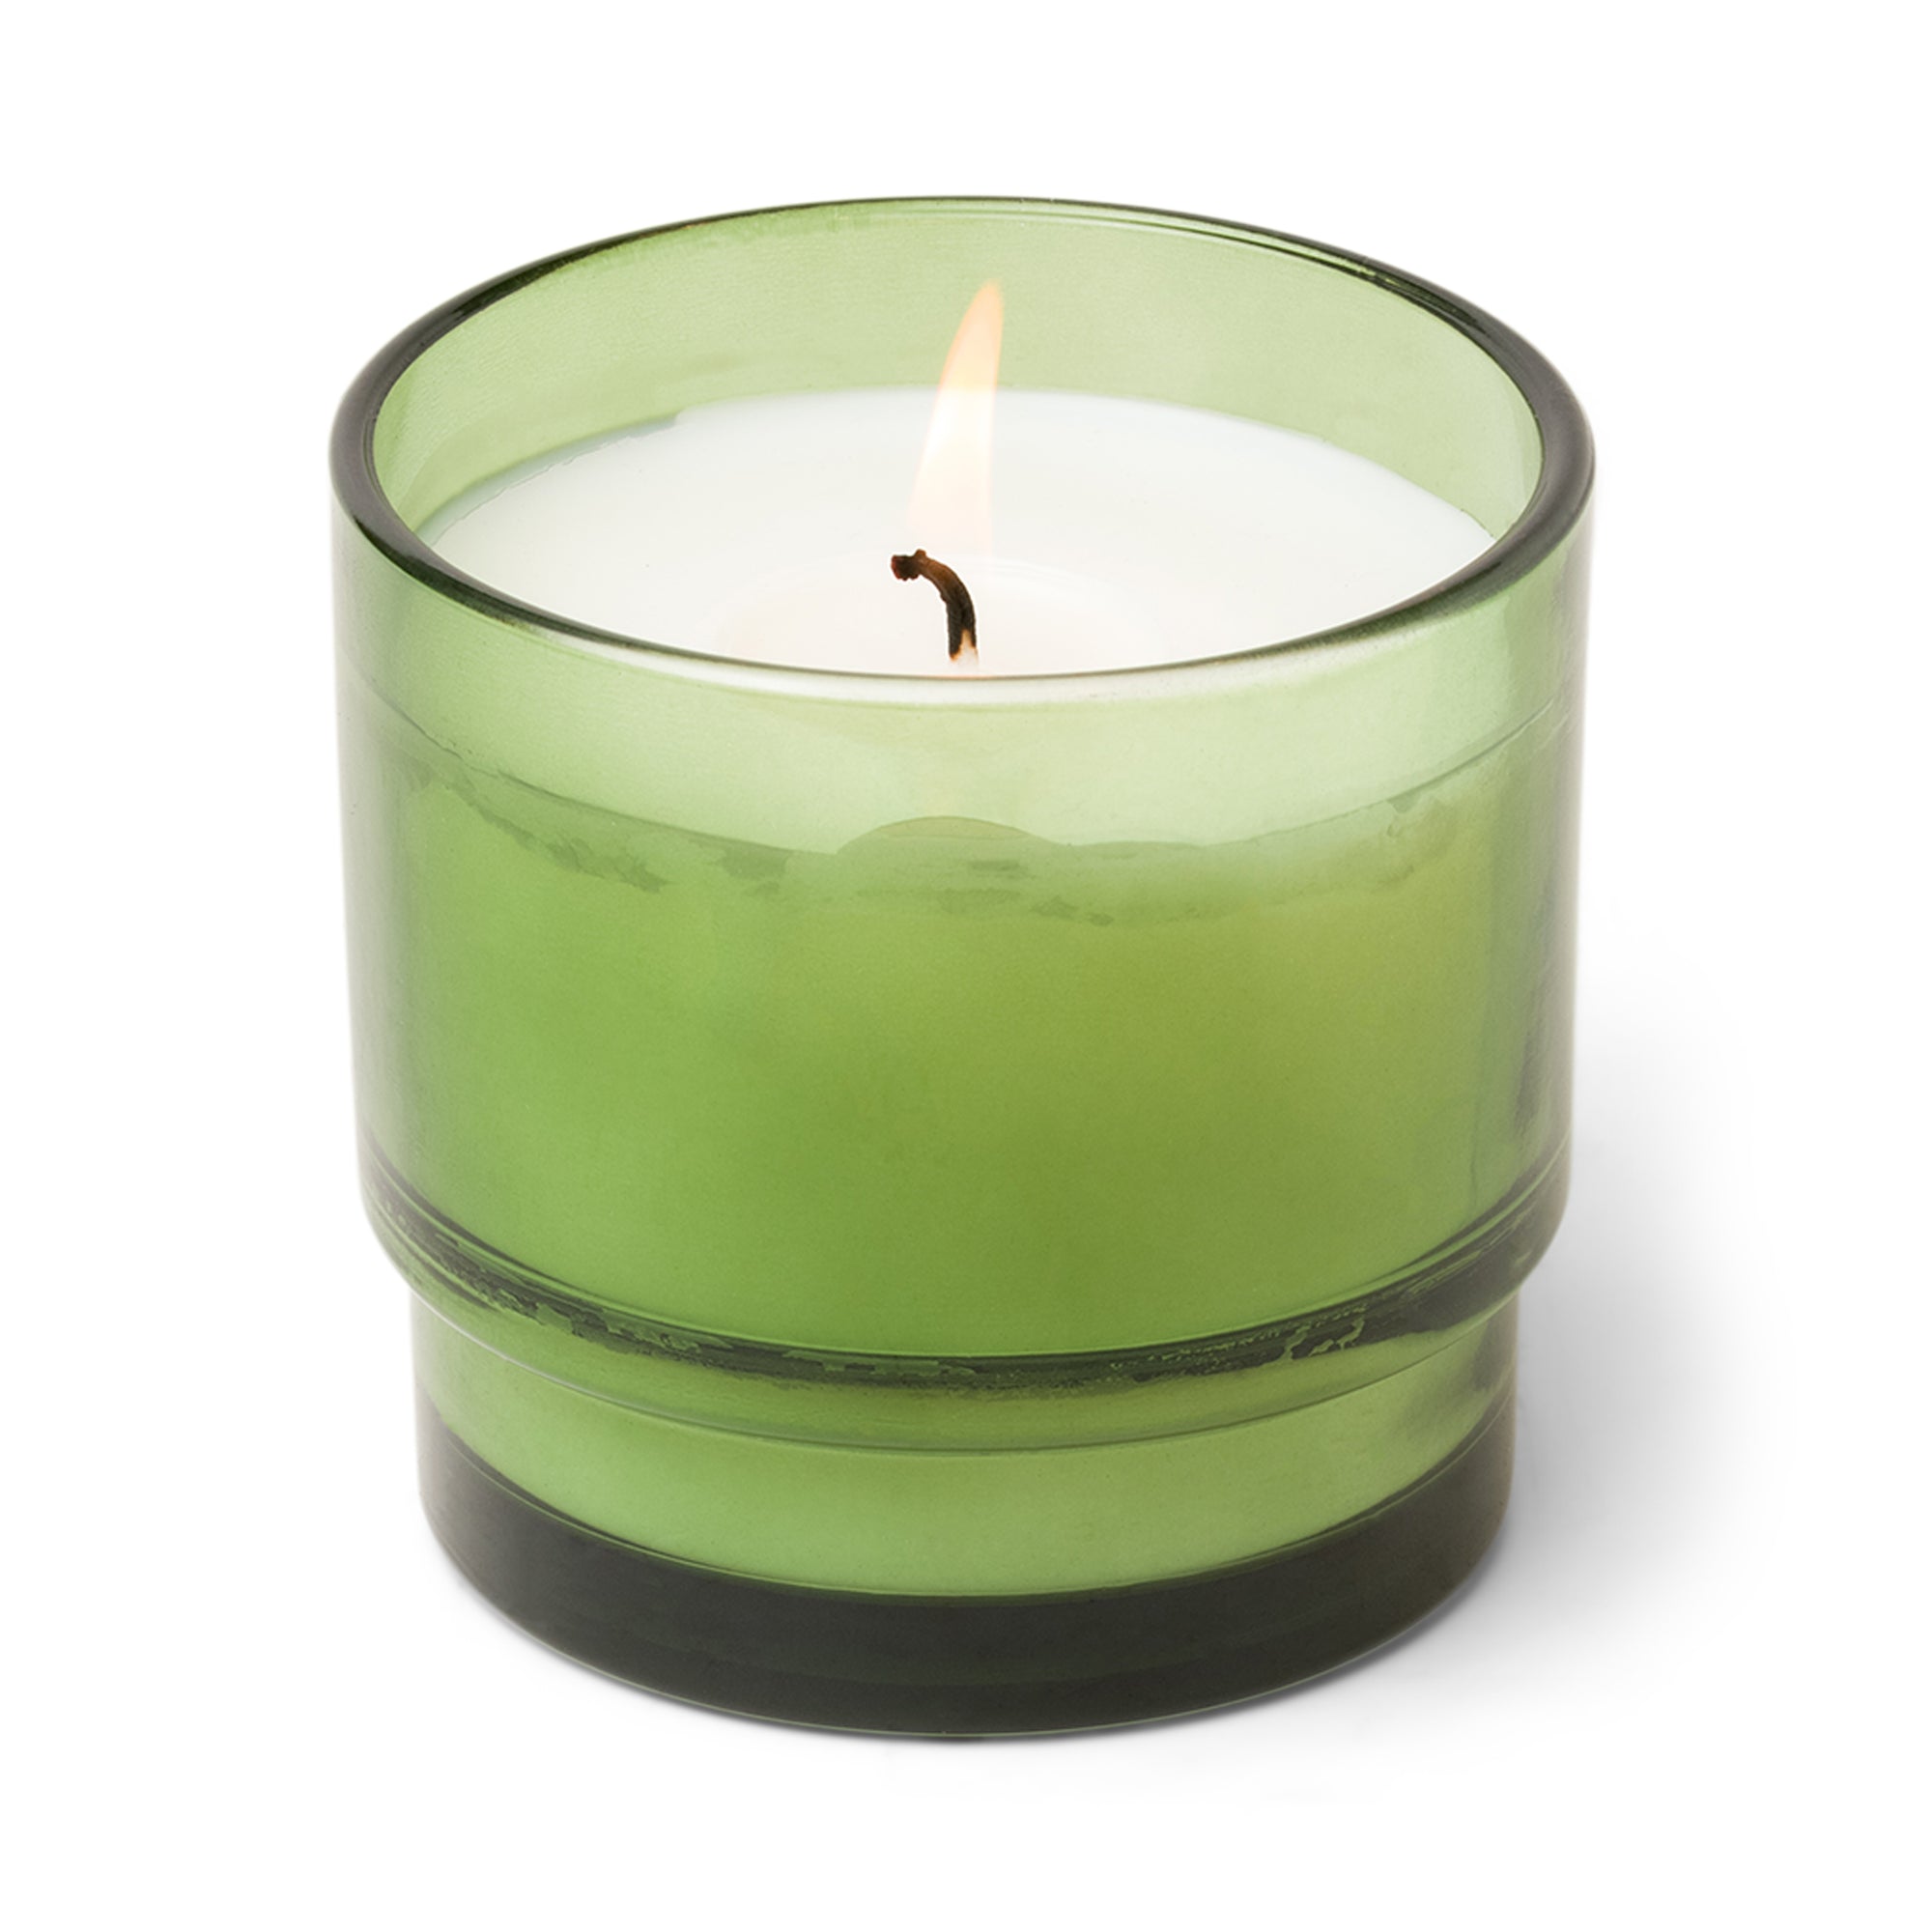 Paddy Wax Al Fresco Glass Candle (198g) - Green - Misted Lime